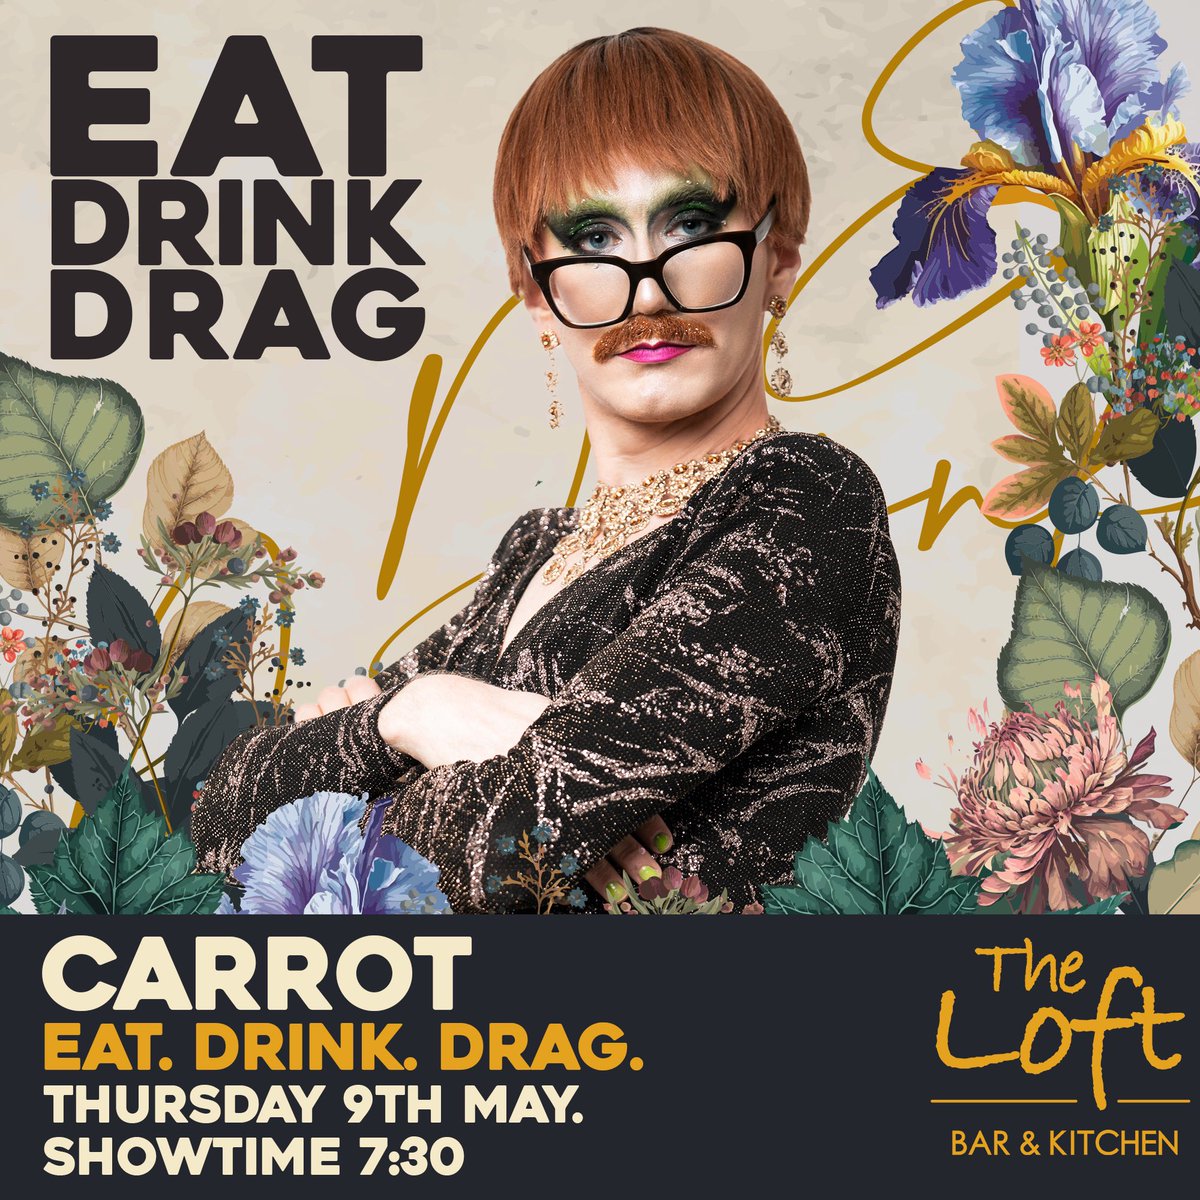 🥕WHO DOESN’T LOVE A CARROT 🥕 We insist on being part of your five a day to help you live a drag filled, happy life! Thursday club meets again this week for Eat, Drink Drag with the fabulous @CarrotDrag with us LIVE at @TheLoftBrum from 7.30pm! 🍸TWO COCKTAILS FOR £12